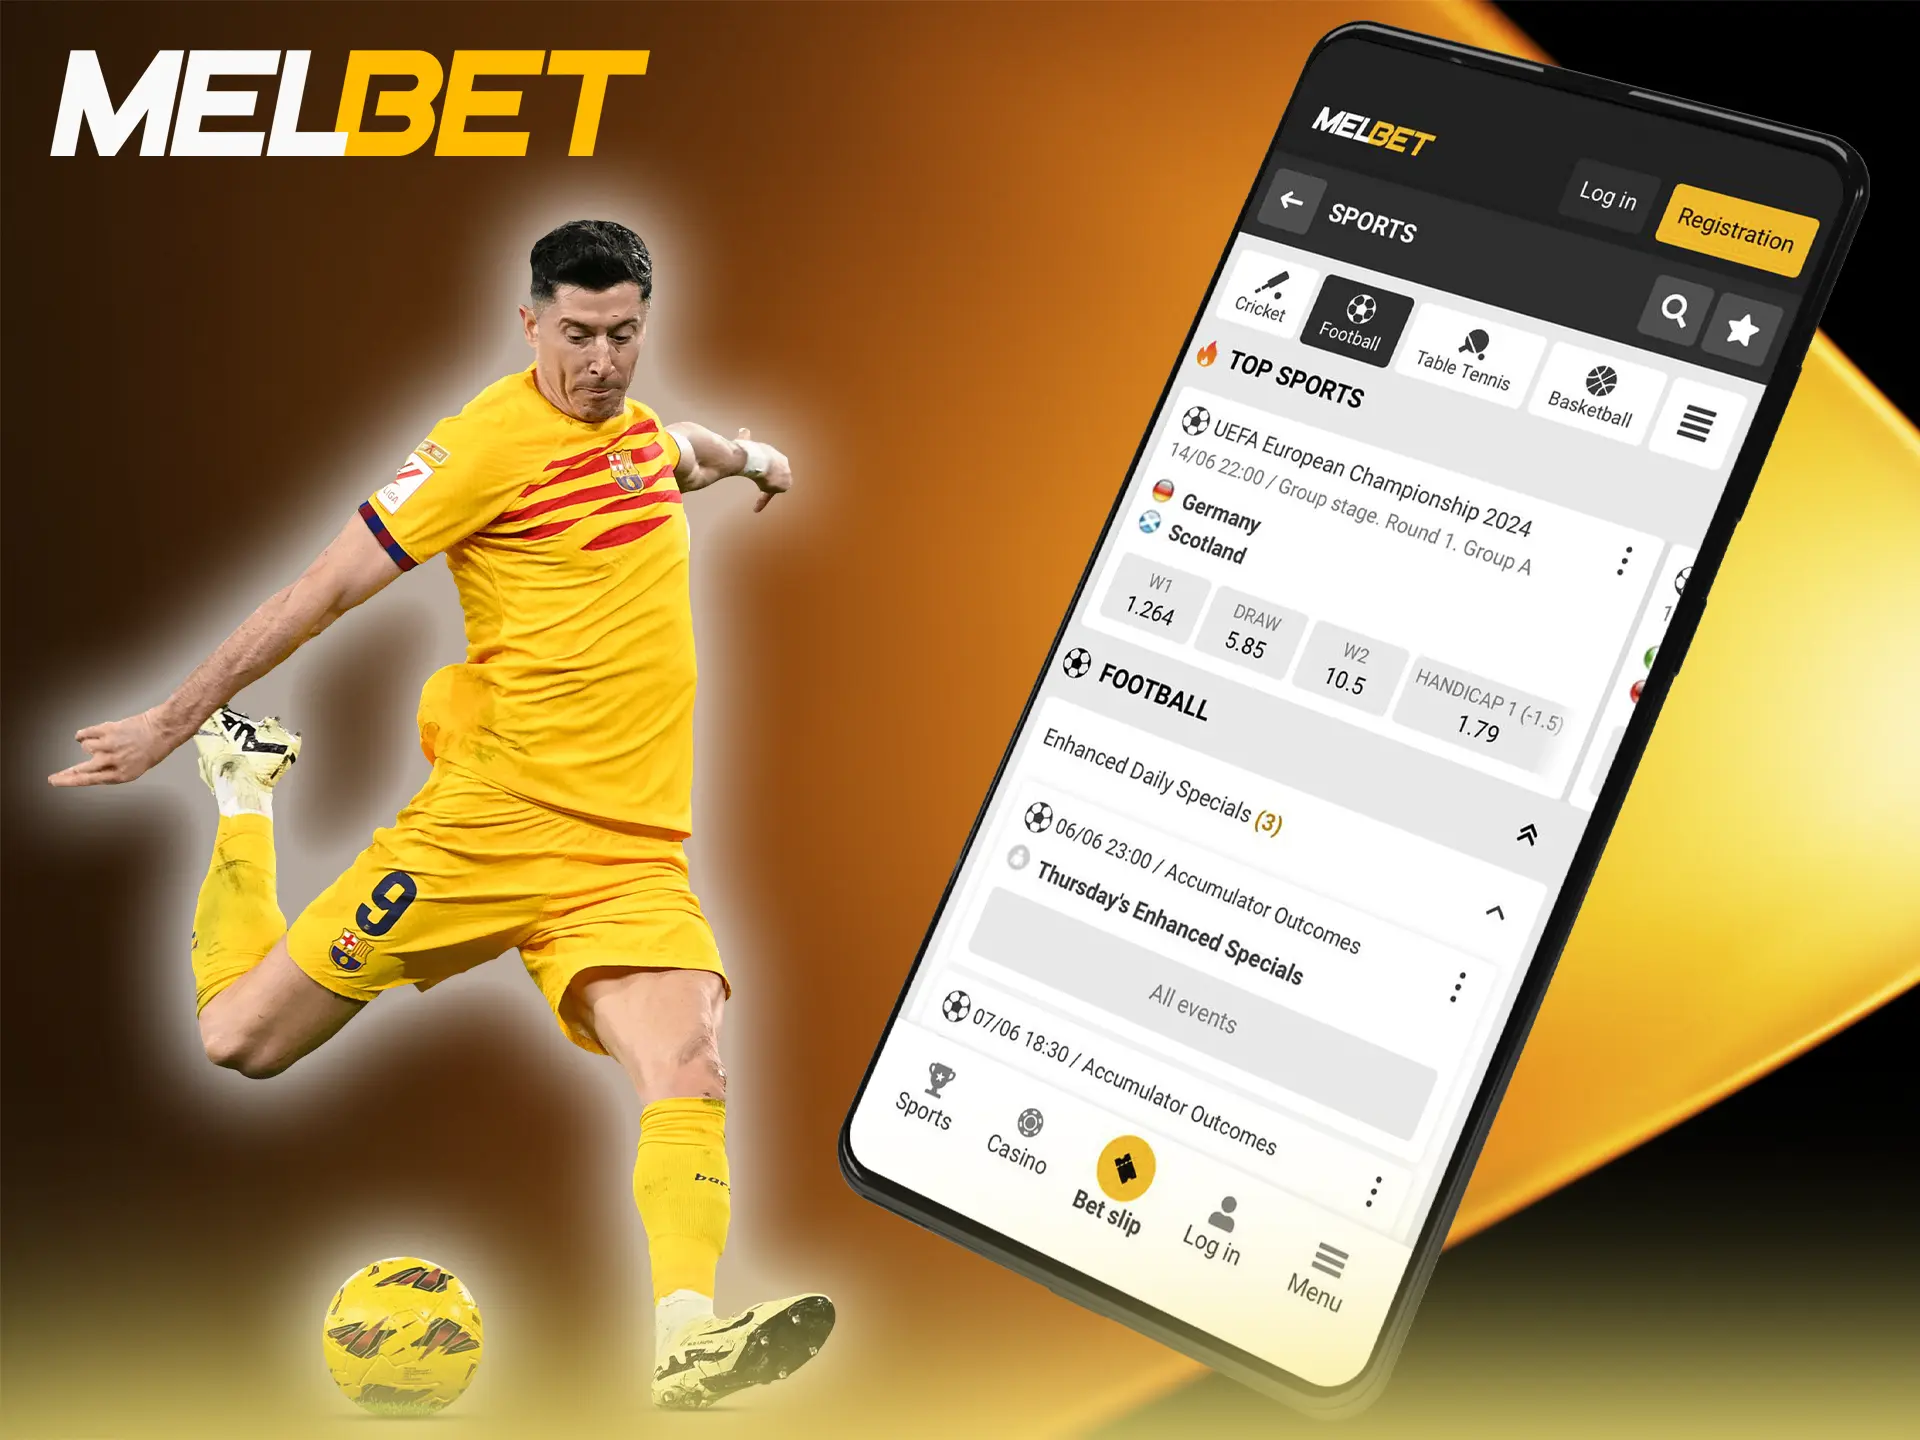 Experience success by betting on a football match on the Melbet app.